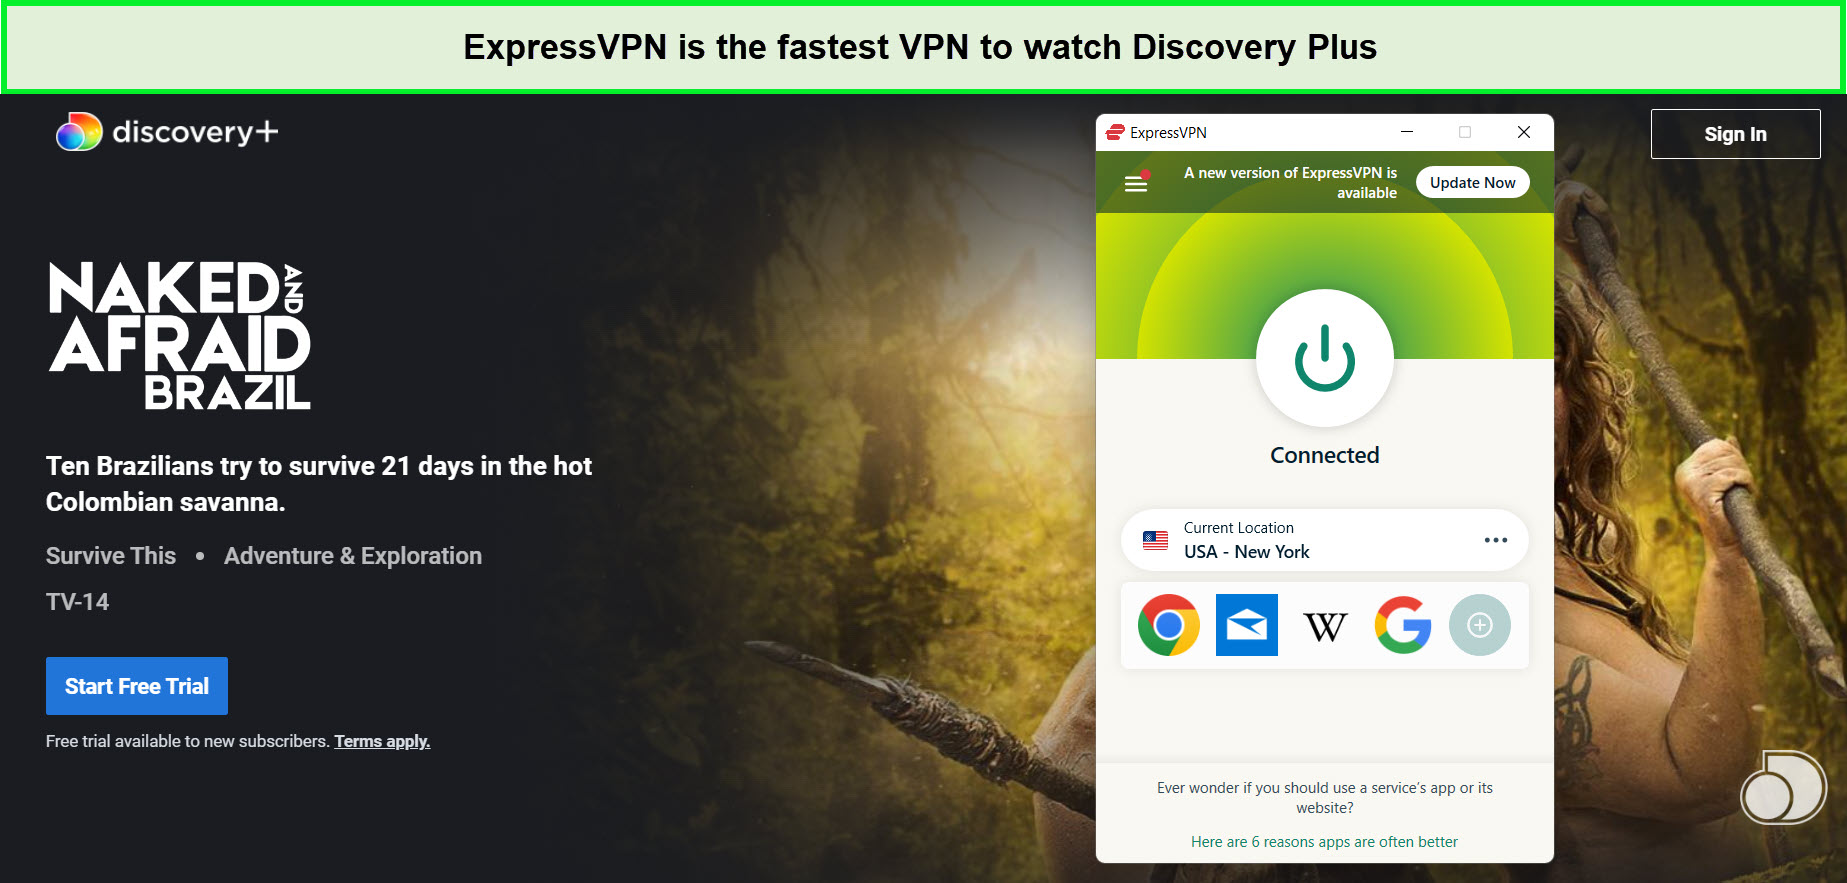 expressvpn-is-the-best-vpn-to-watch-naked-and-afraid-brazil-season-16-on-discovery-plus-uk